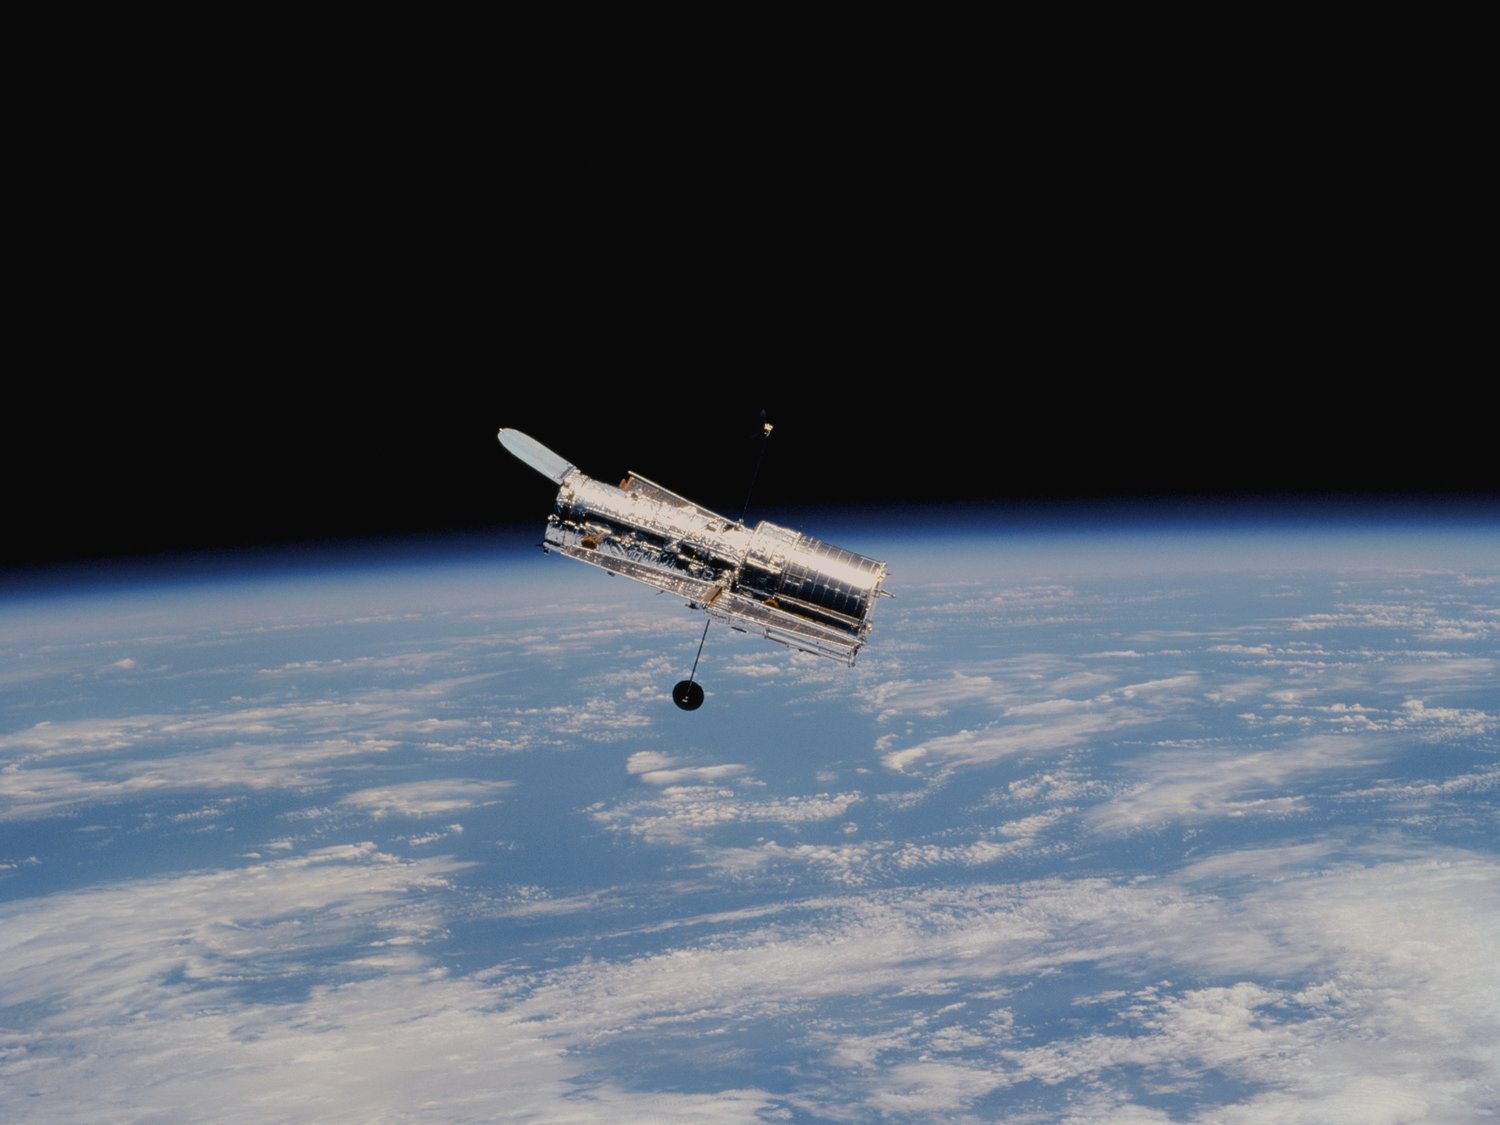 The Hubble Space Telescope after deployment on its second servicing mission (HST SM-02)